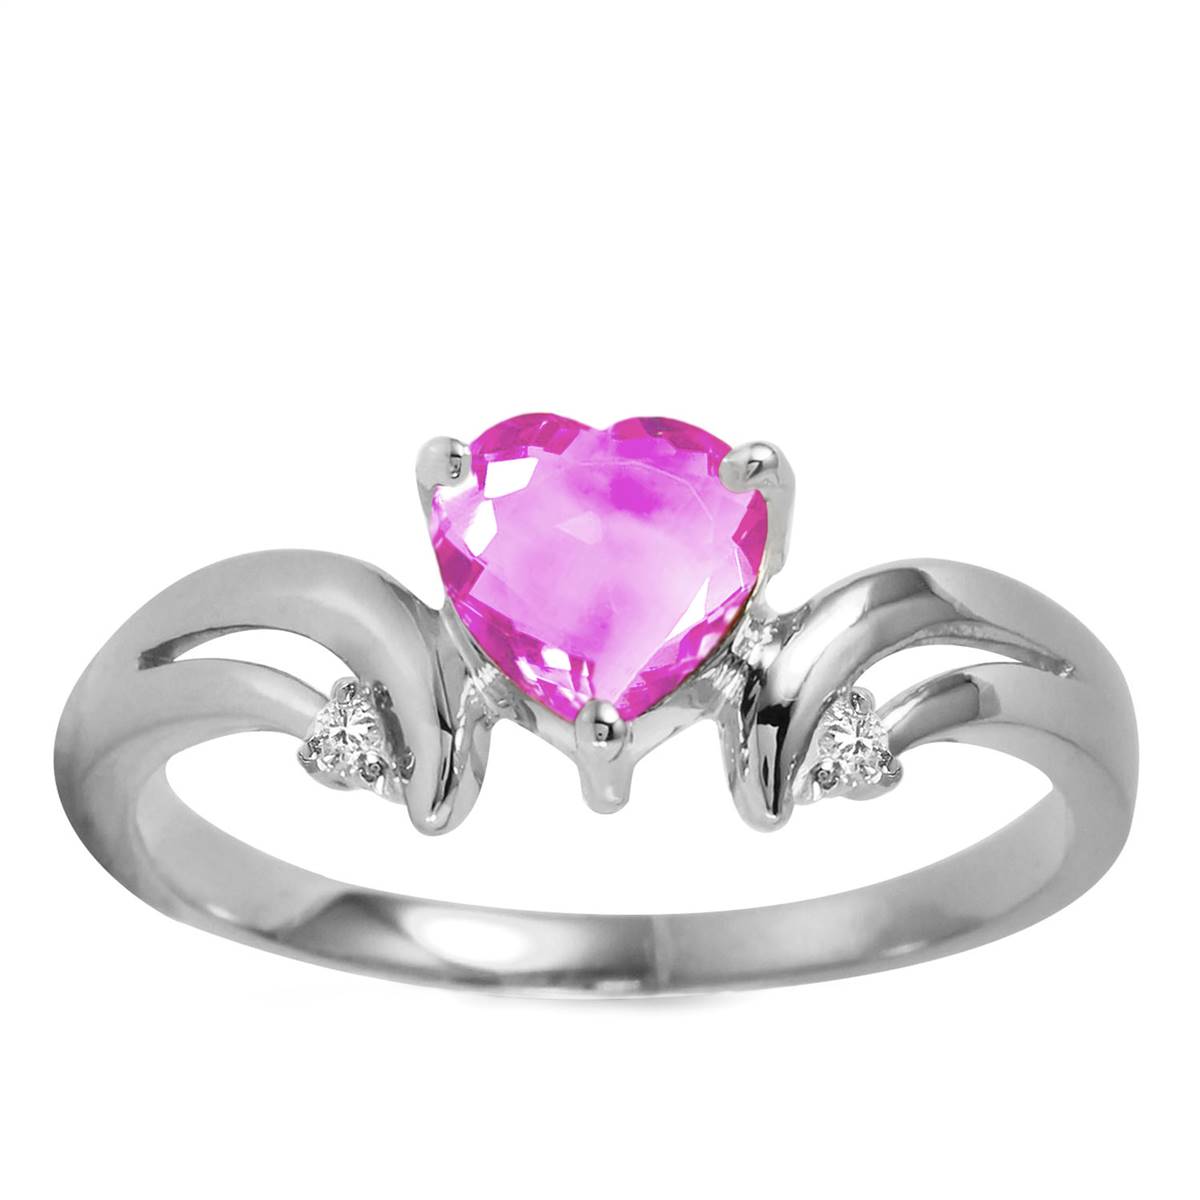 0.96 Carat 14K Solid White Gold Evening Song Pink Topaz Diamond Ring